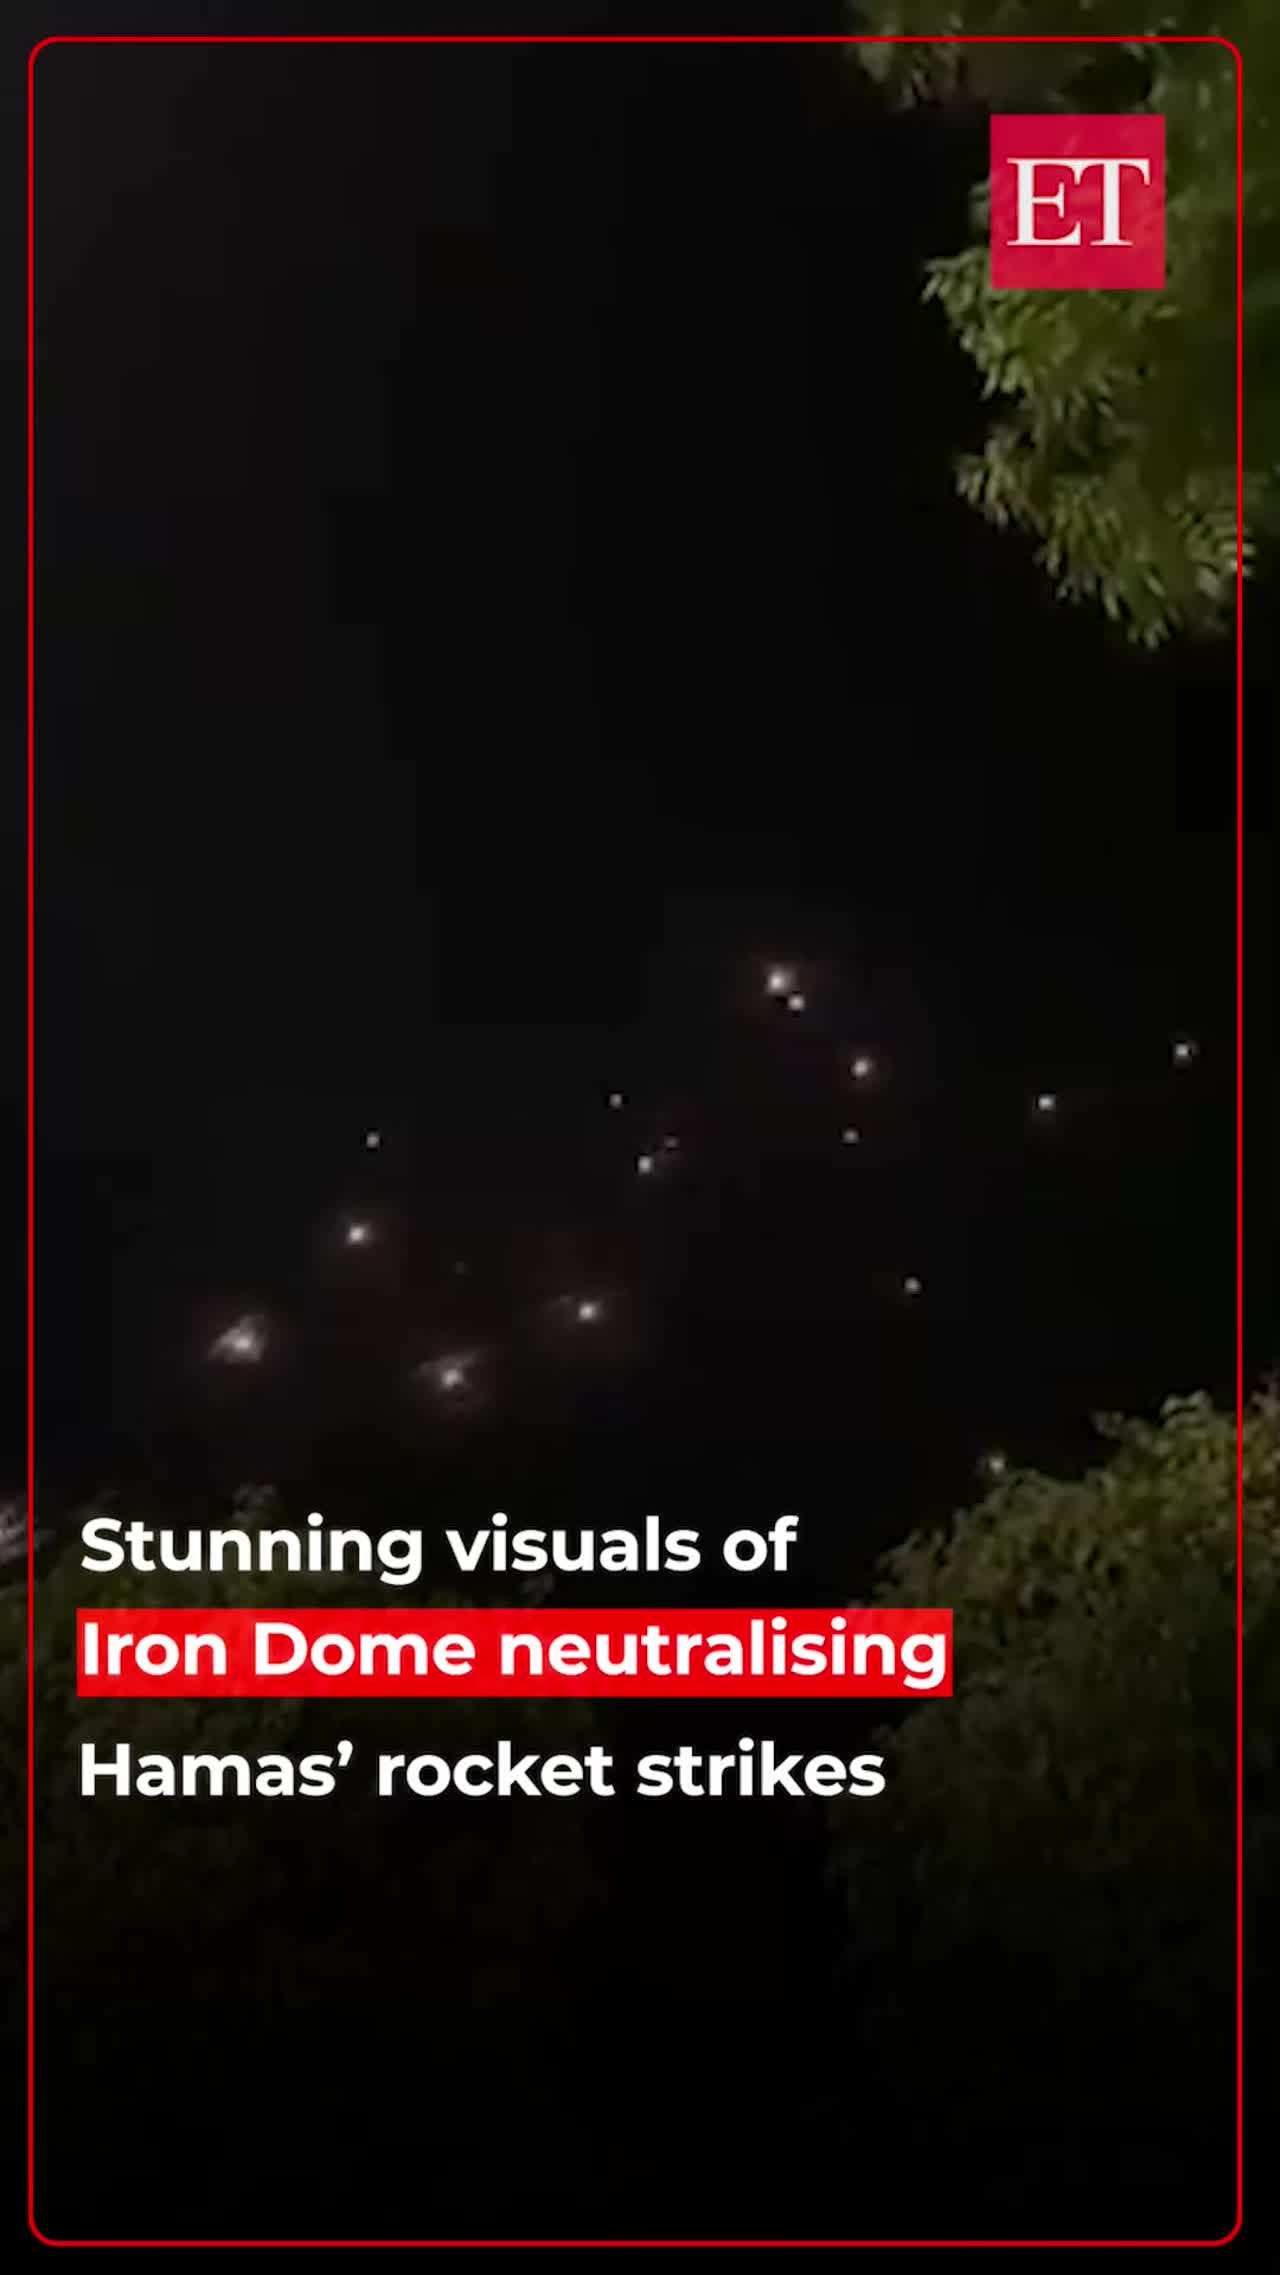 Israel releases video of Iron Dome, watch!